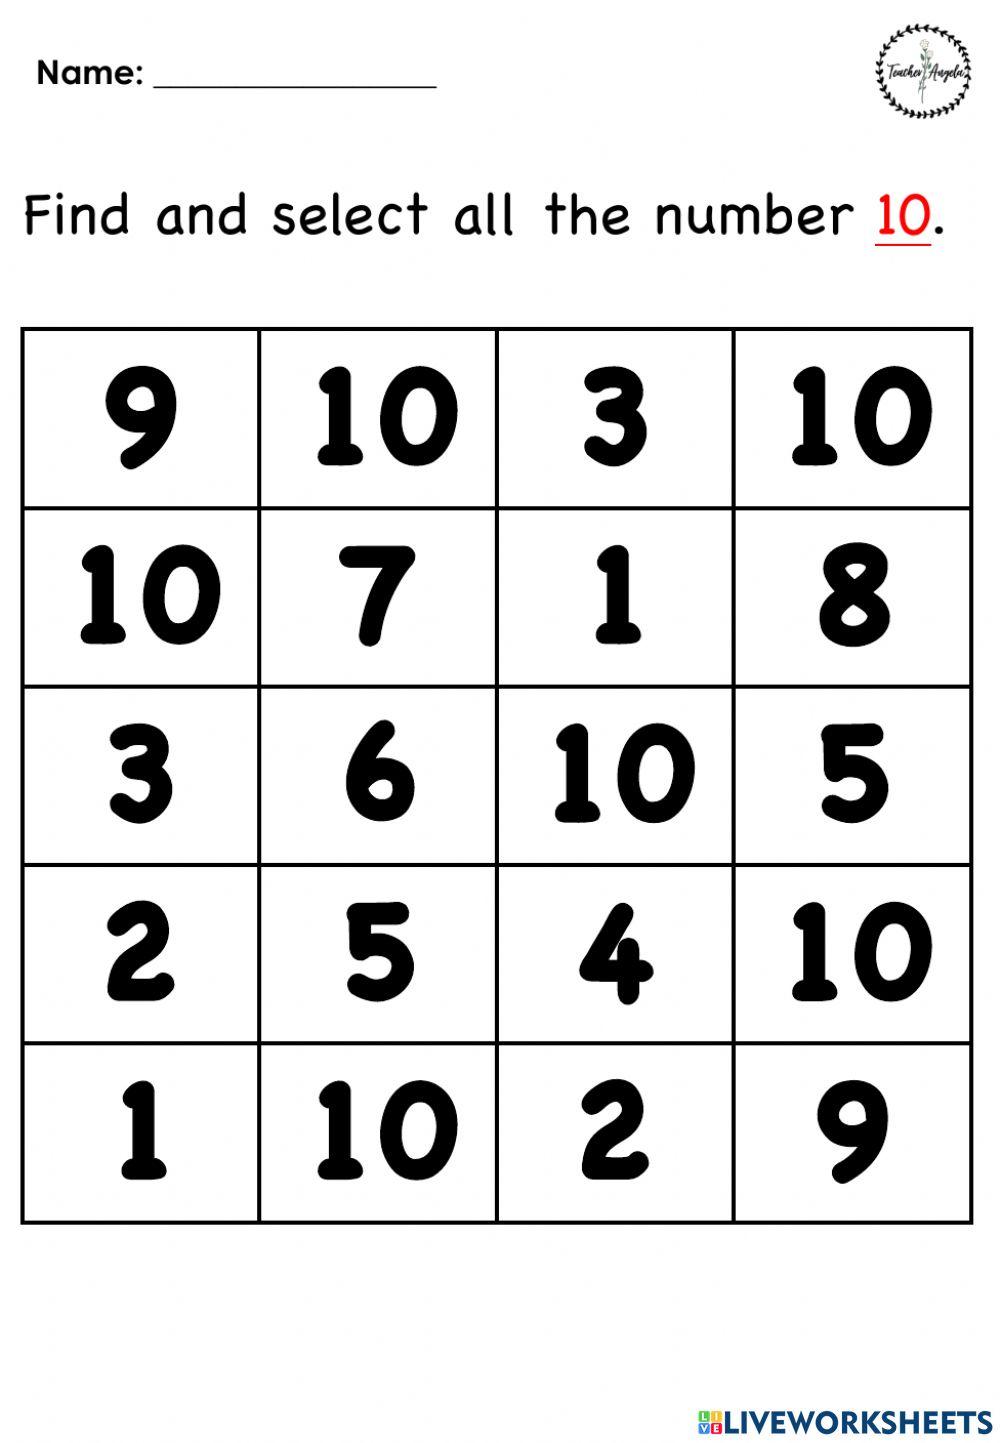 Find the number 10